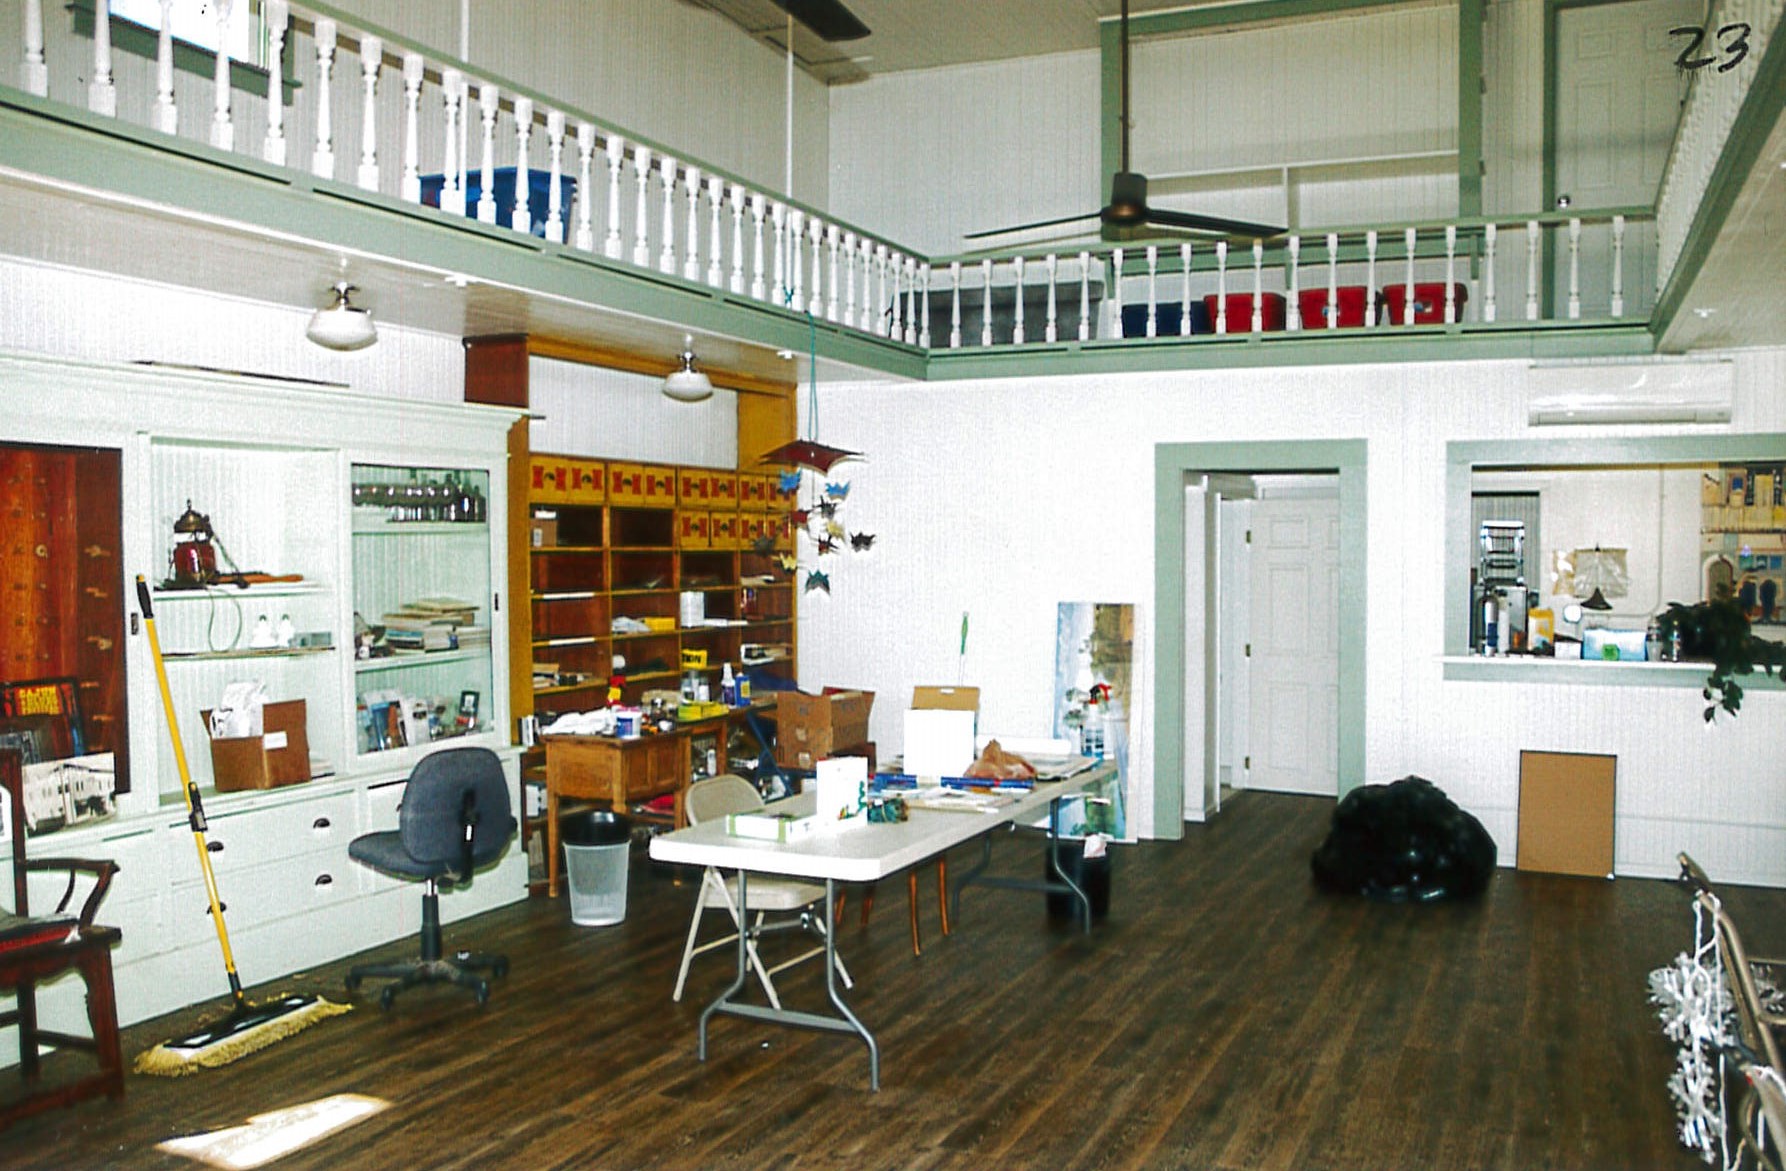 Renovated building interior, from front looking towards the back